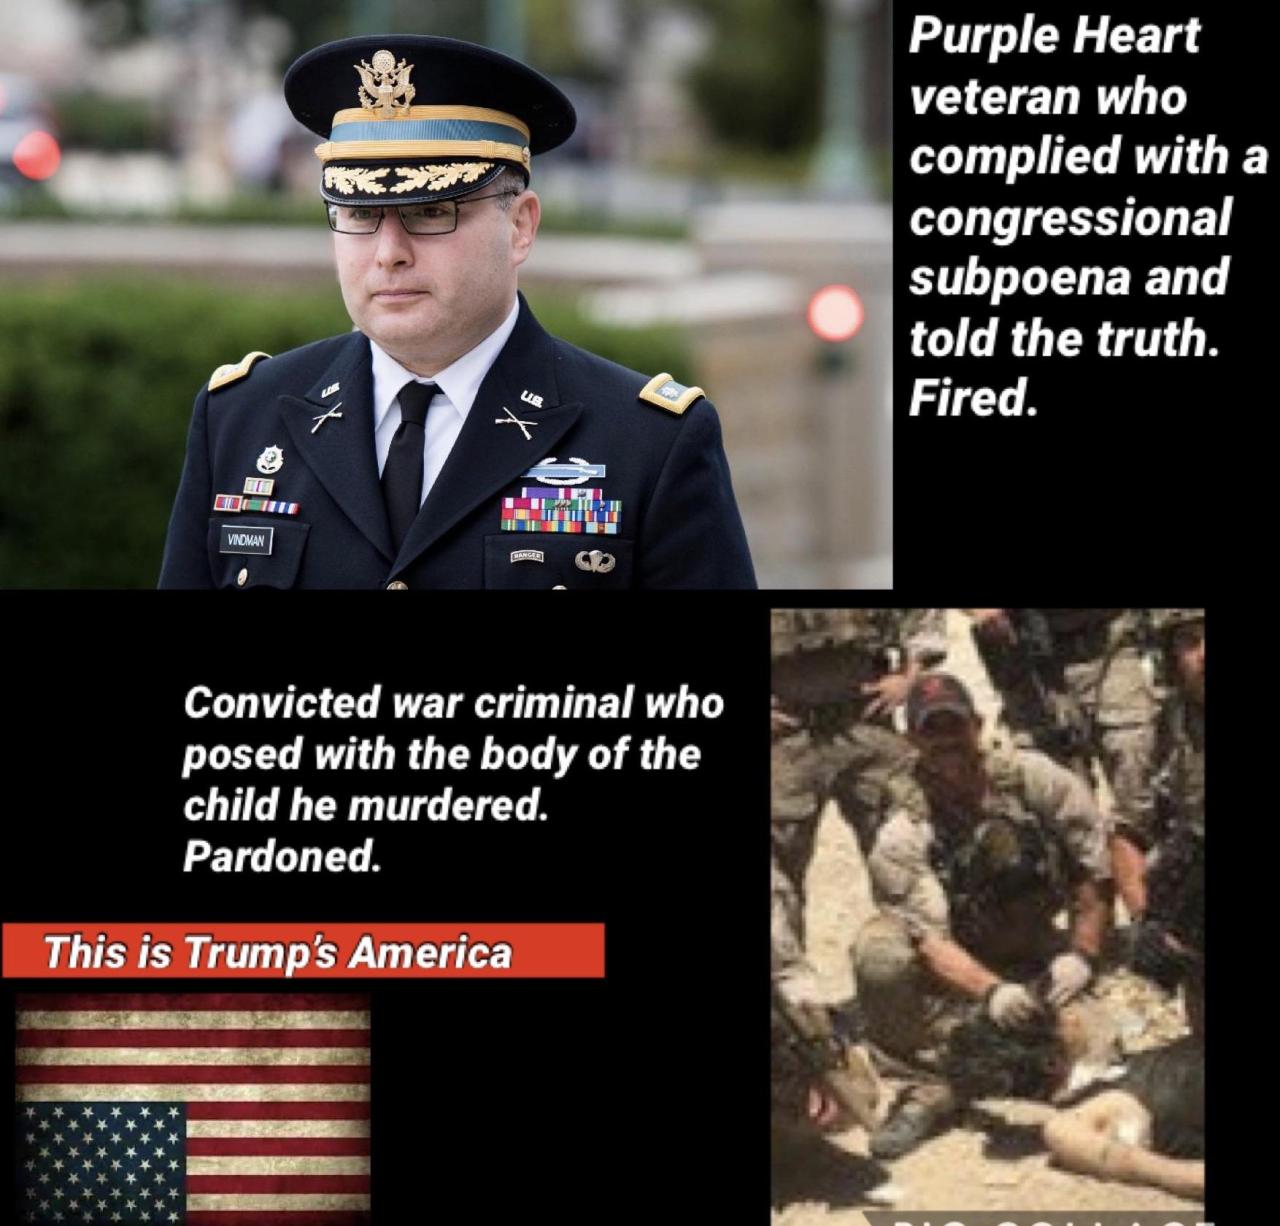 colonel vindman - Purple Heart veteran who complied with a congressional subpoena and told the truth. Fired. Vindman Mangee Convicted war criminal who posed with the body of the child he murdered. Pardoned. This is Trump's America